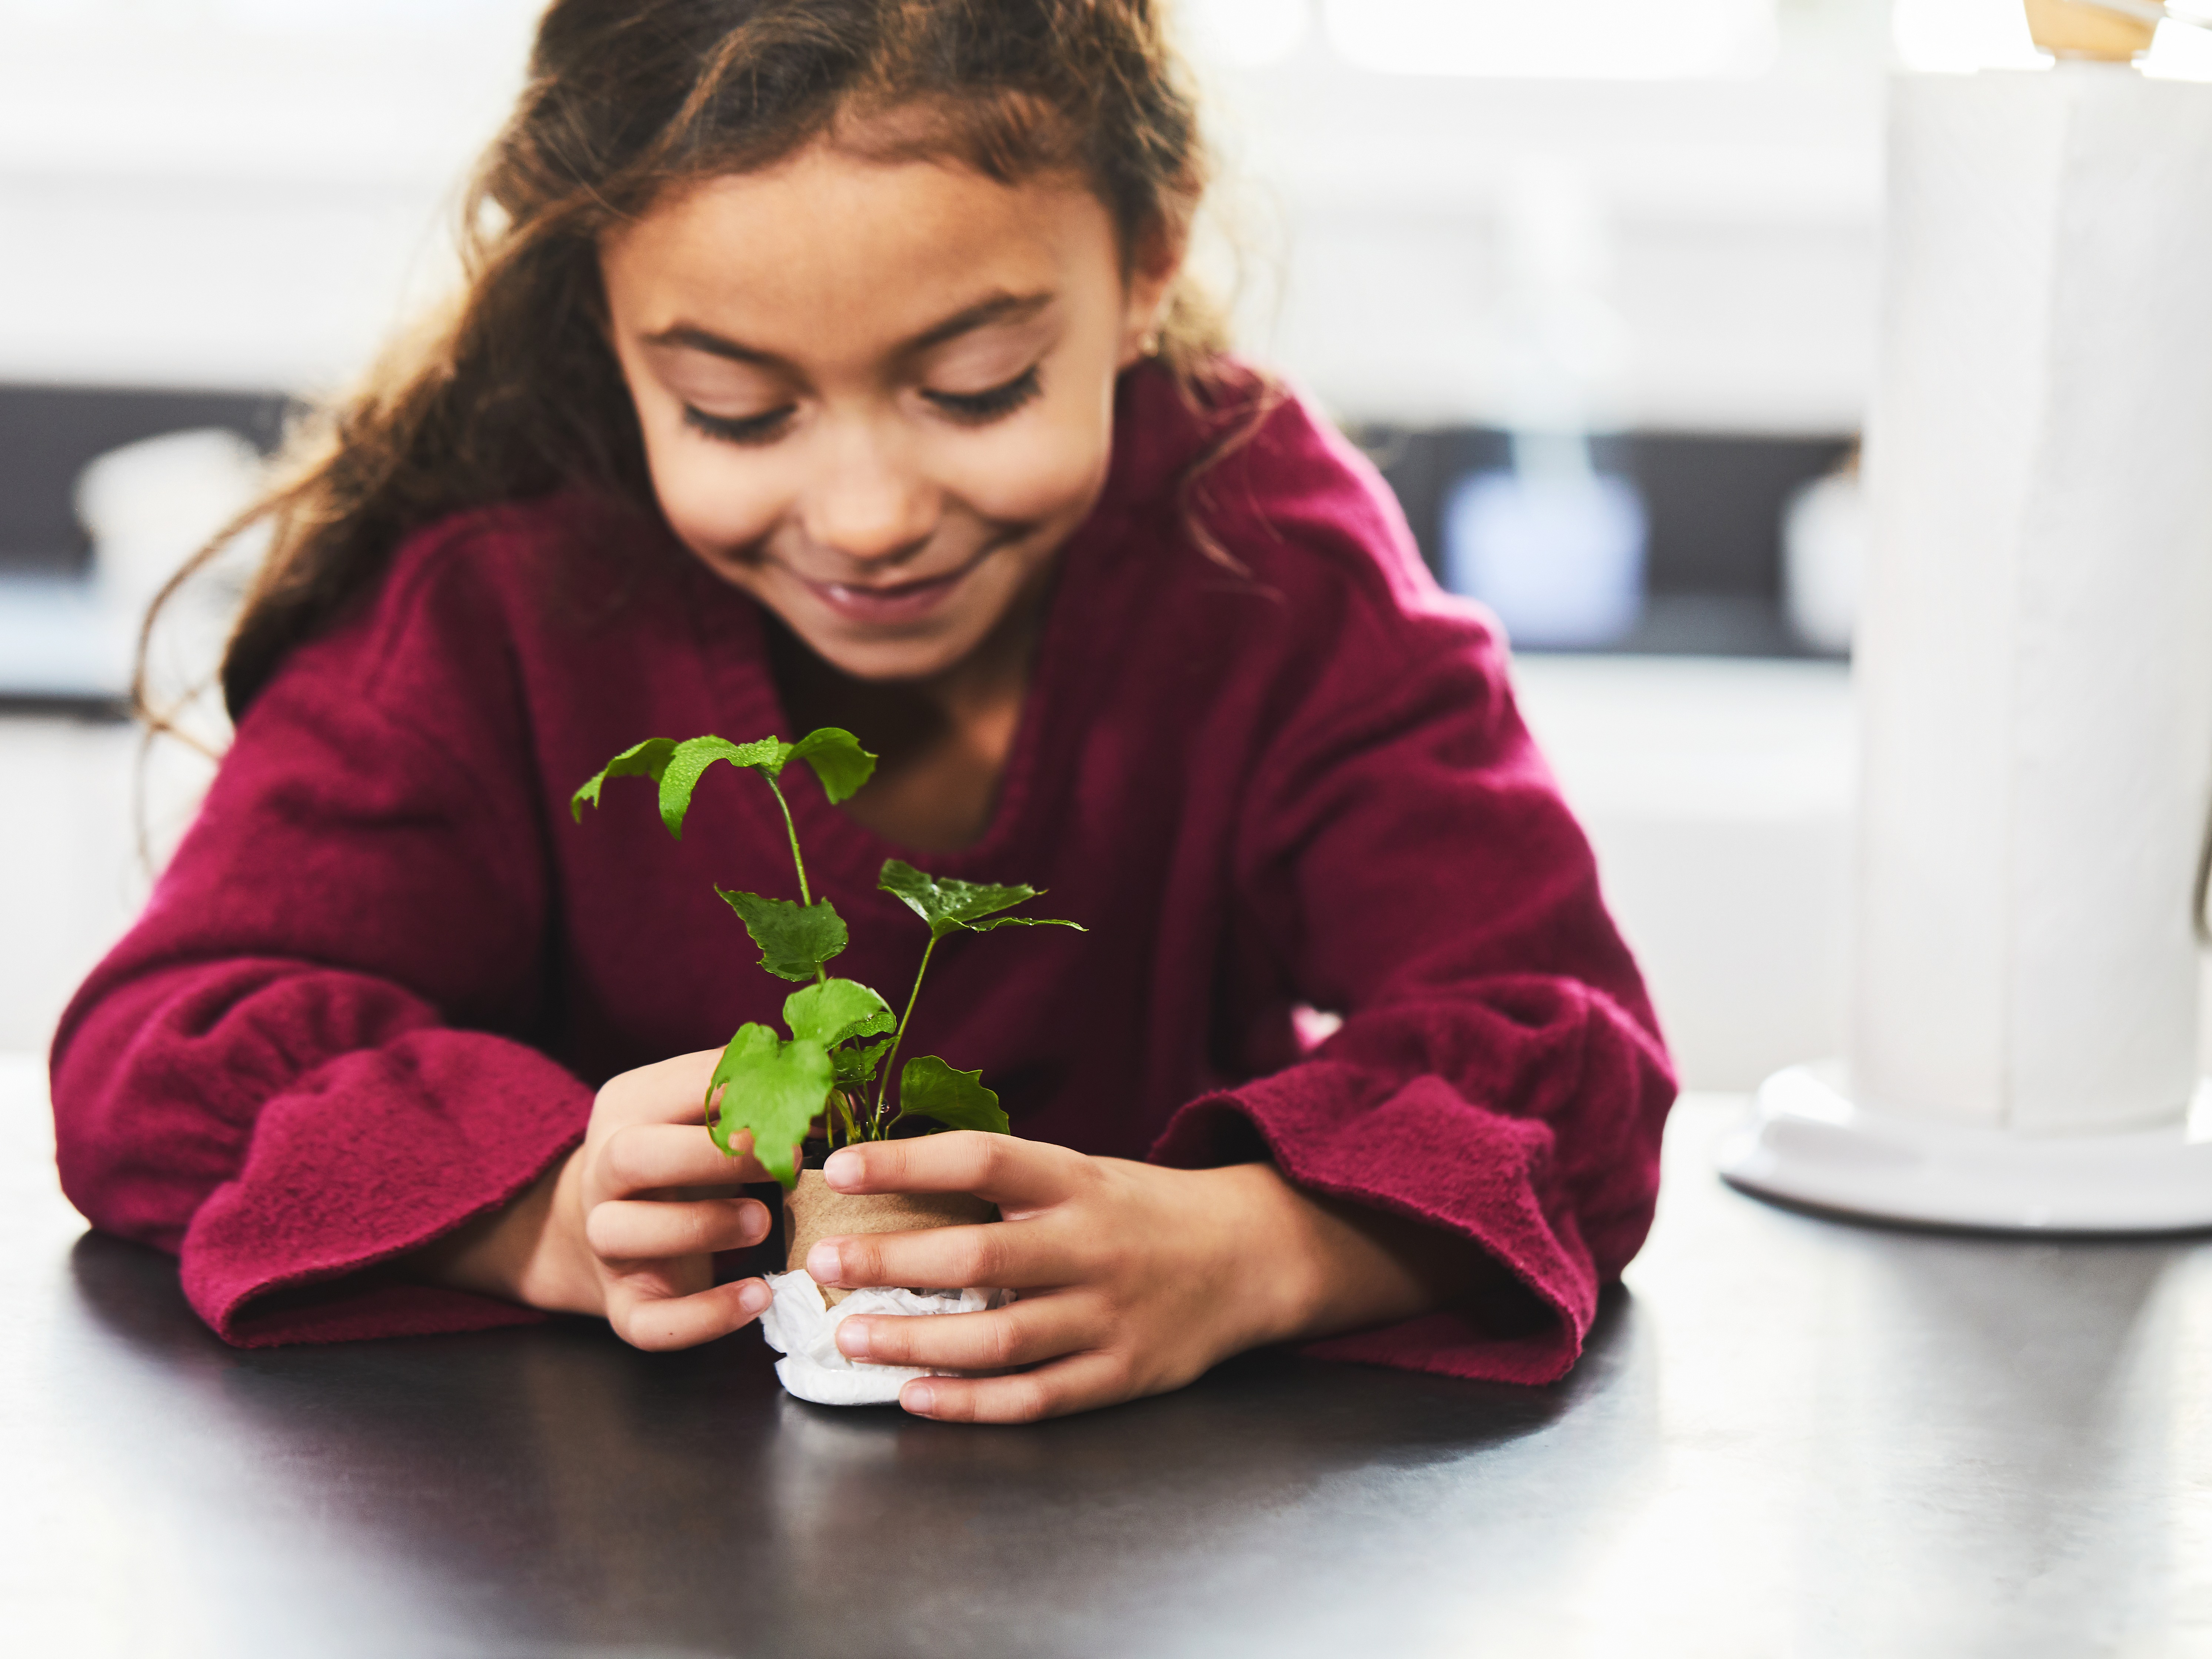 Image of girl in red shirt holding a small potted plant on counter